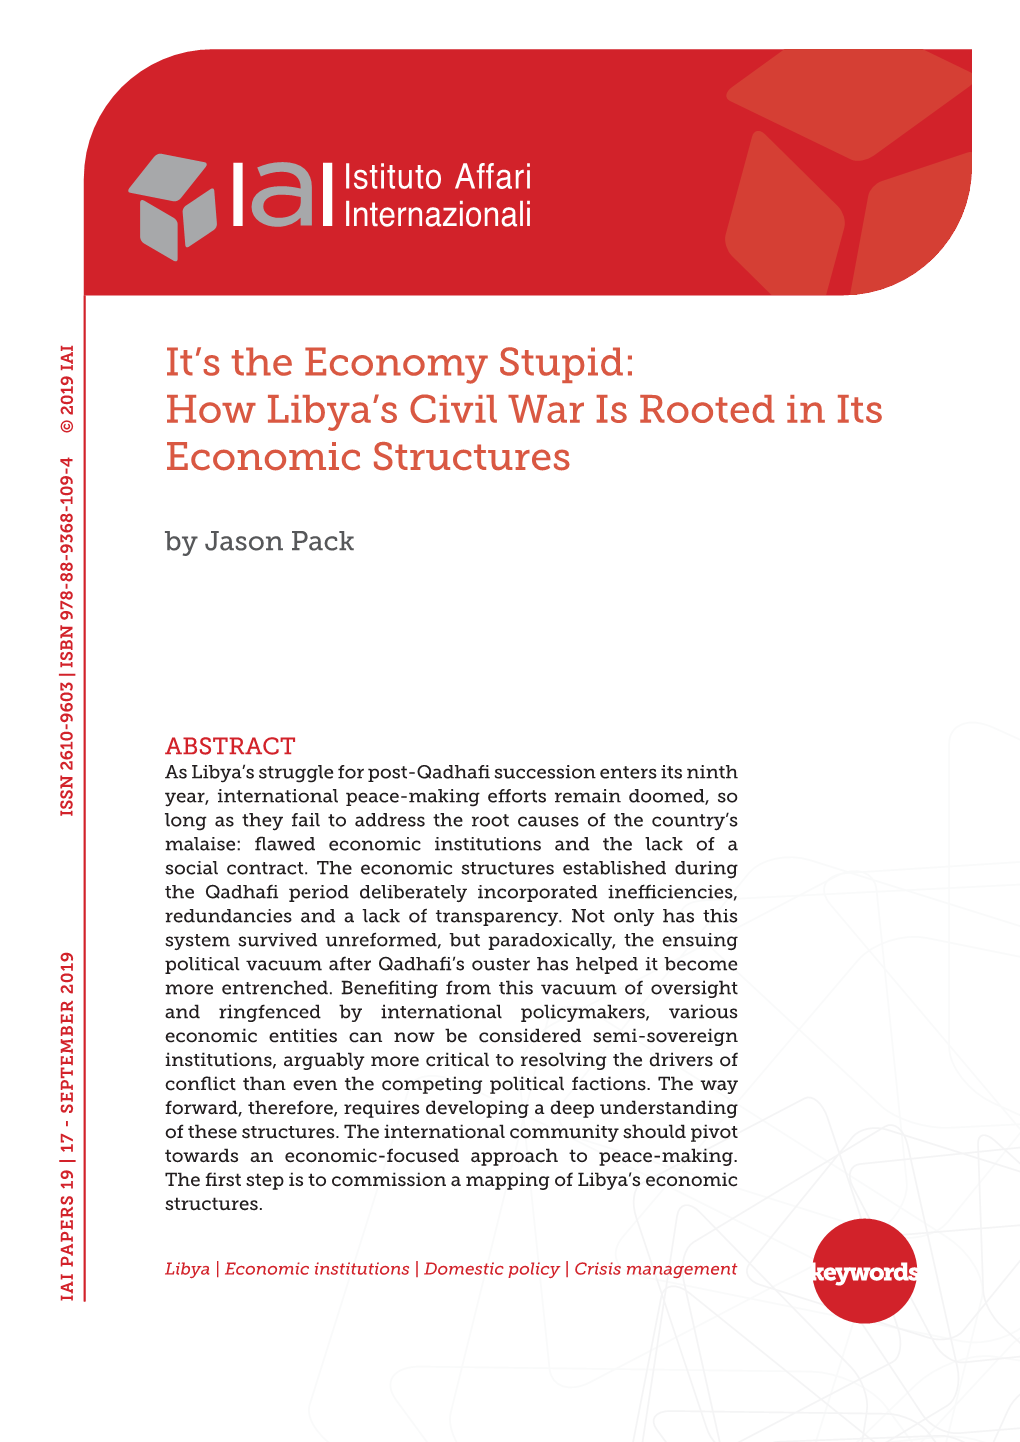 It's the Economy Stupid: How Libya's Civil War Is Rooted in Its Economic